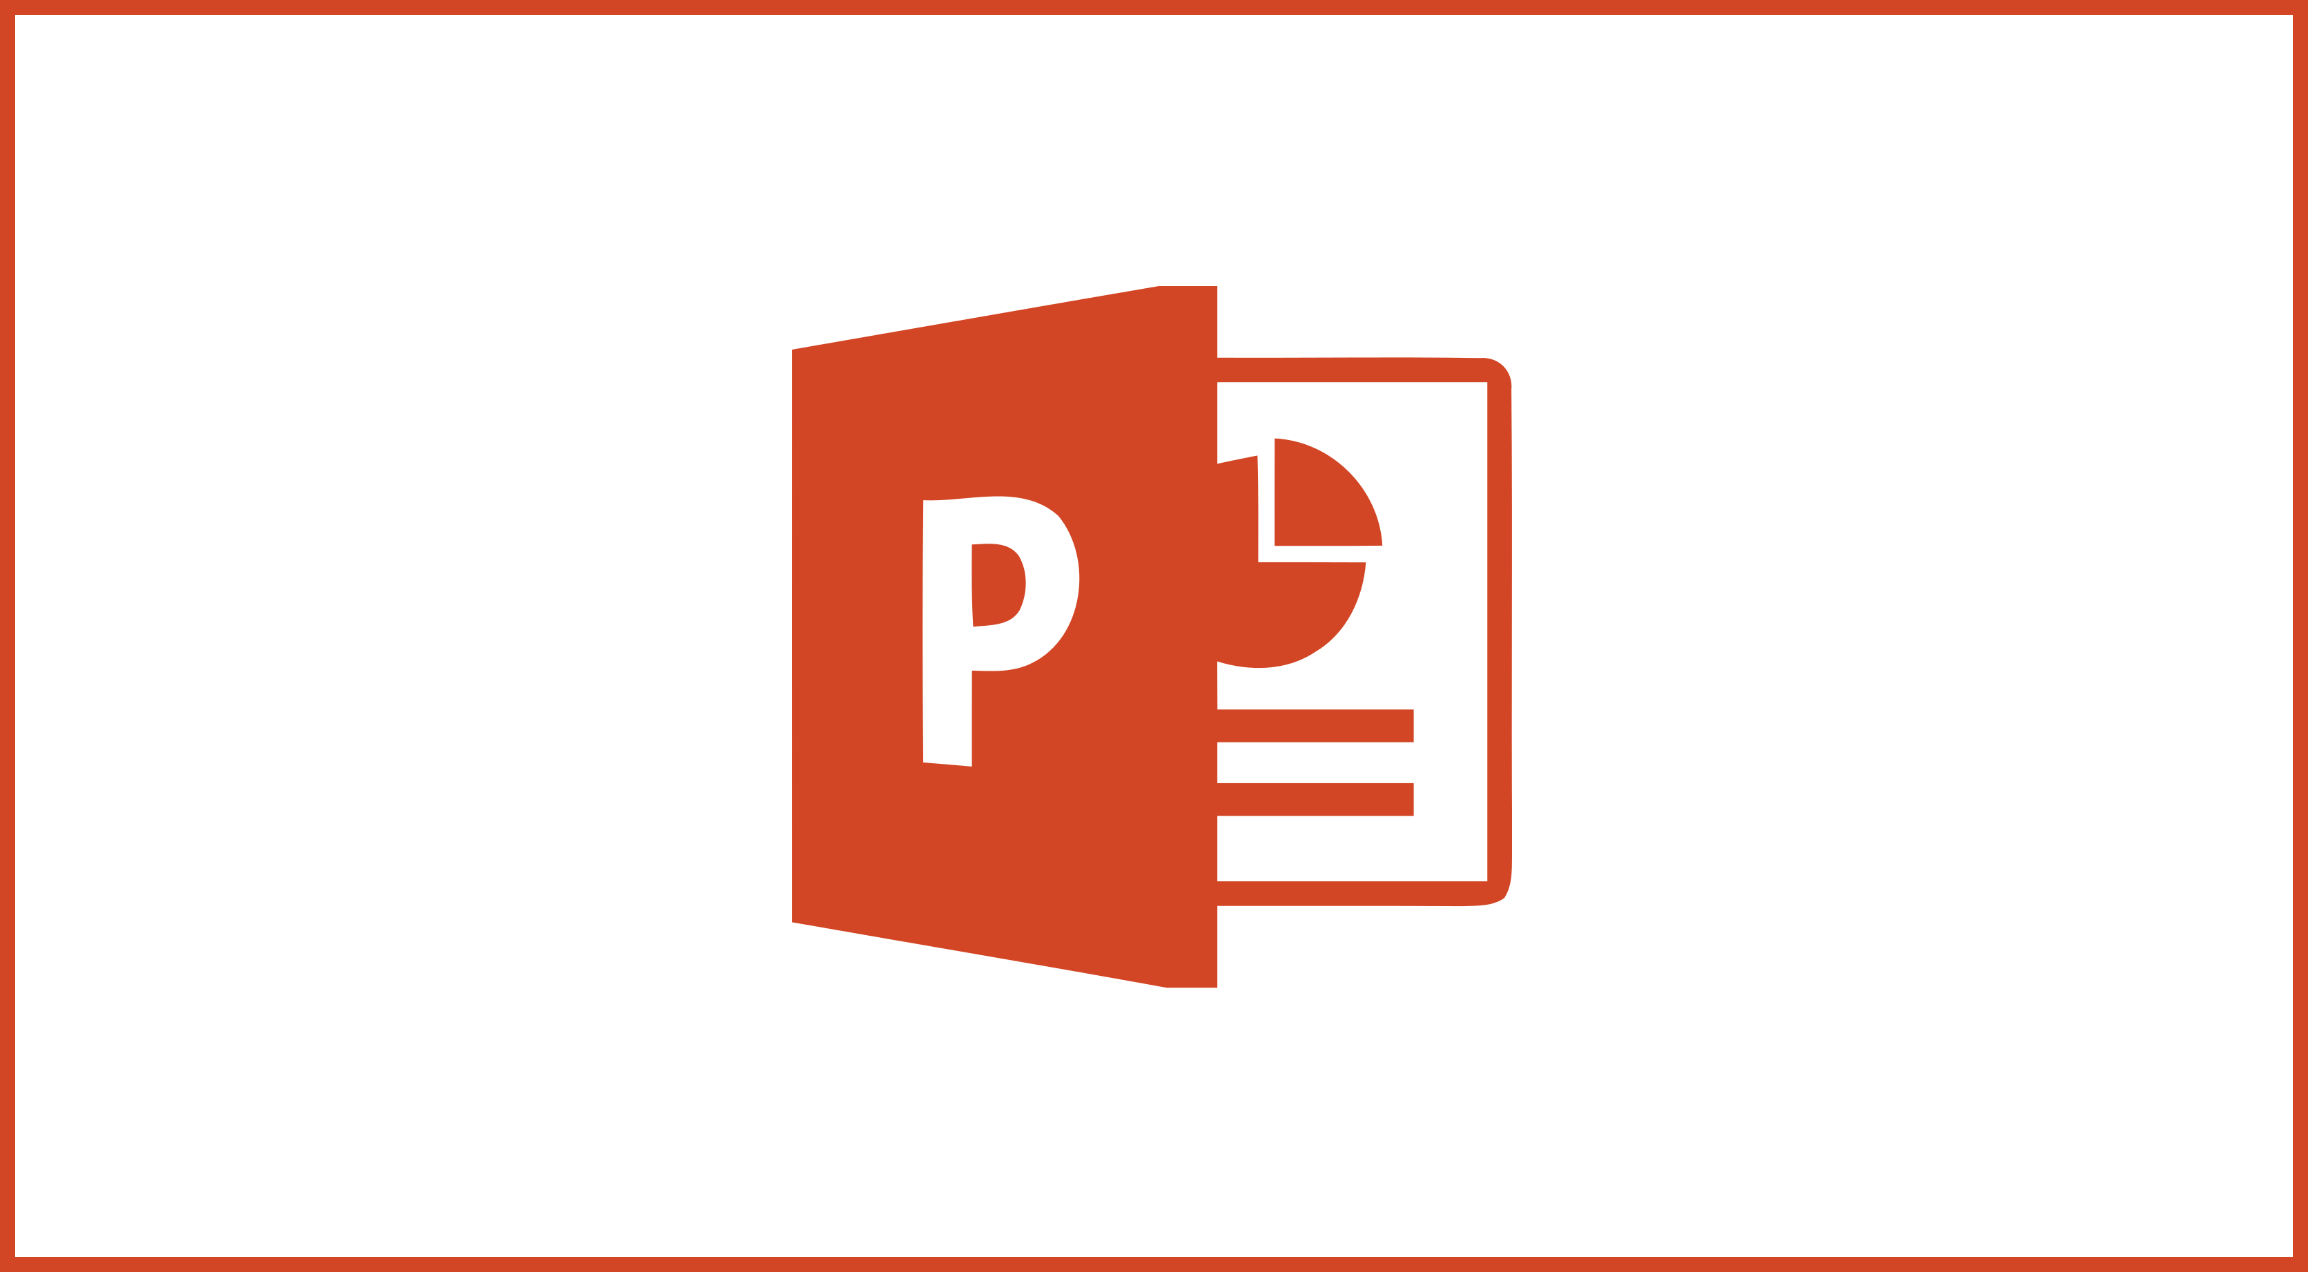 search for all powerpoint files on mac